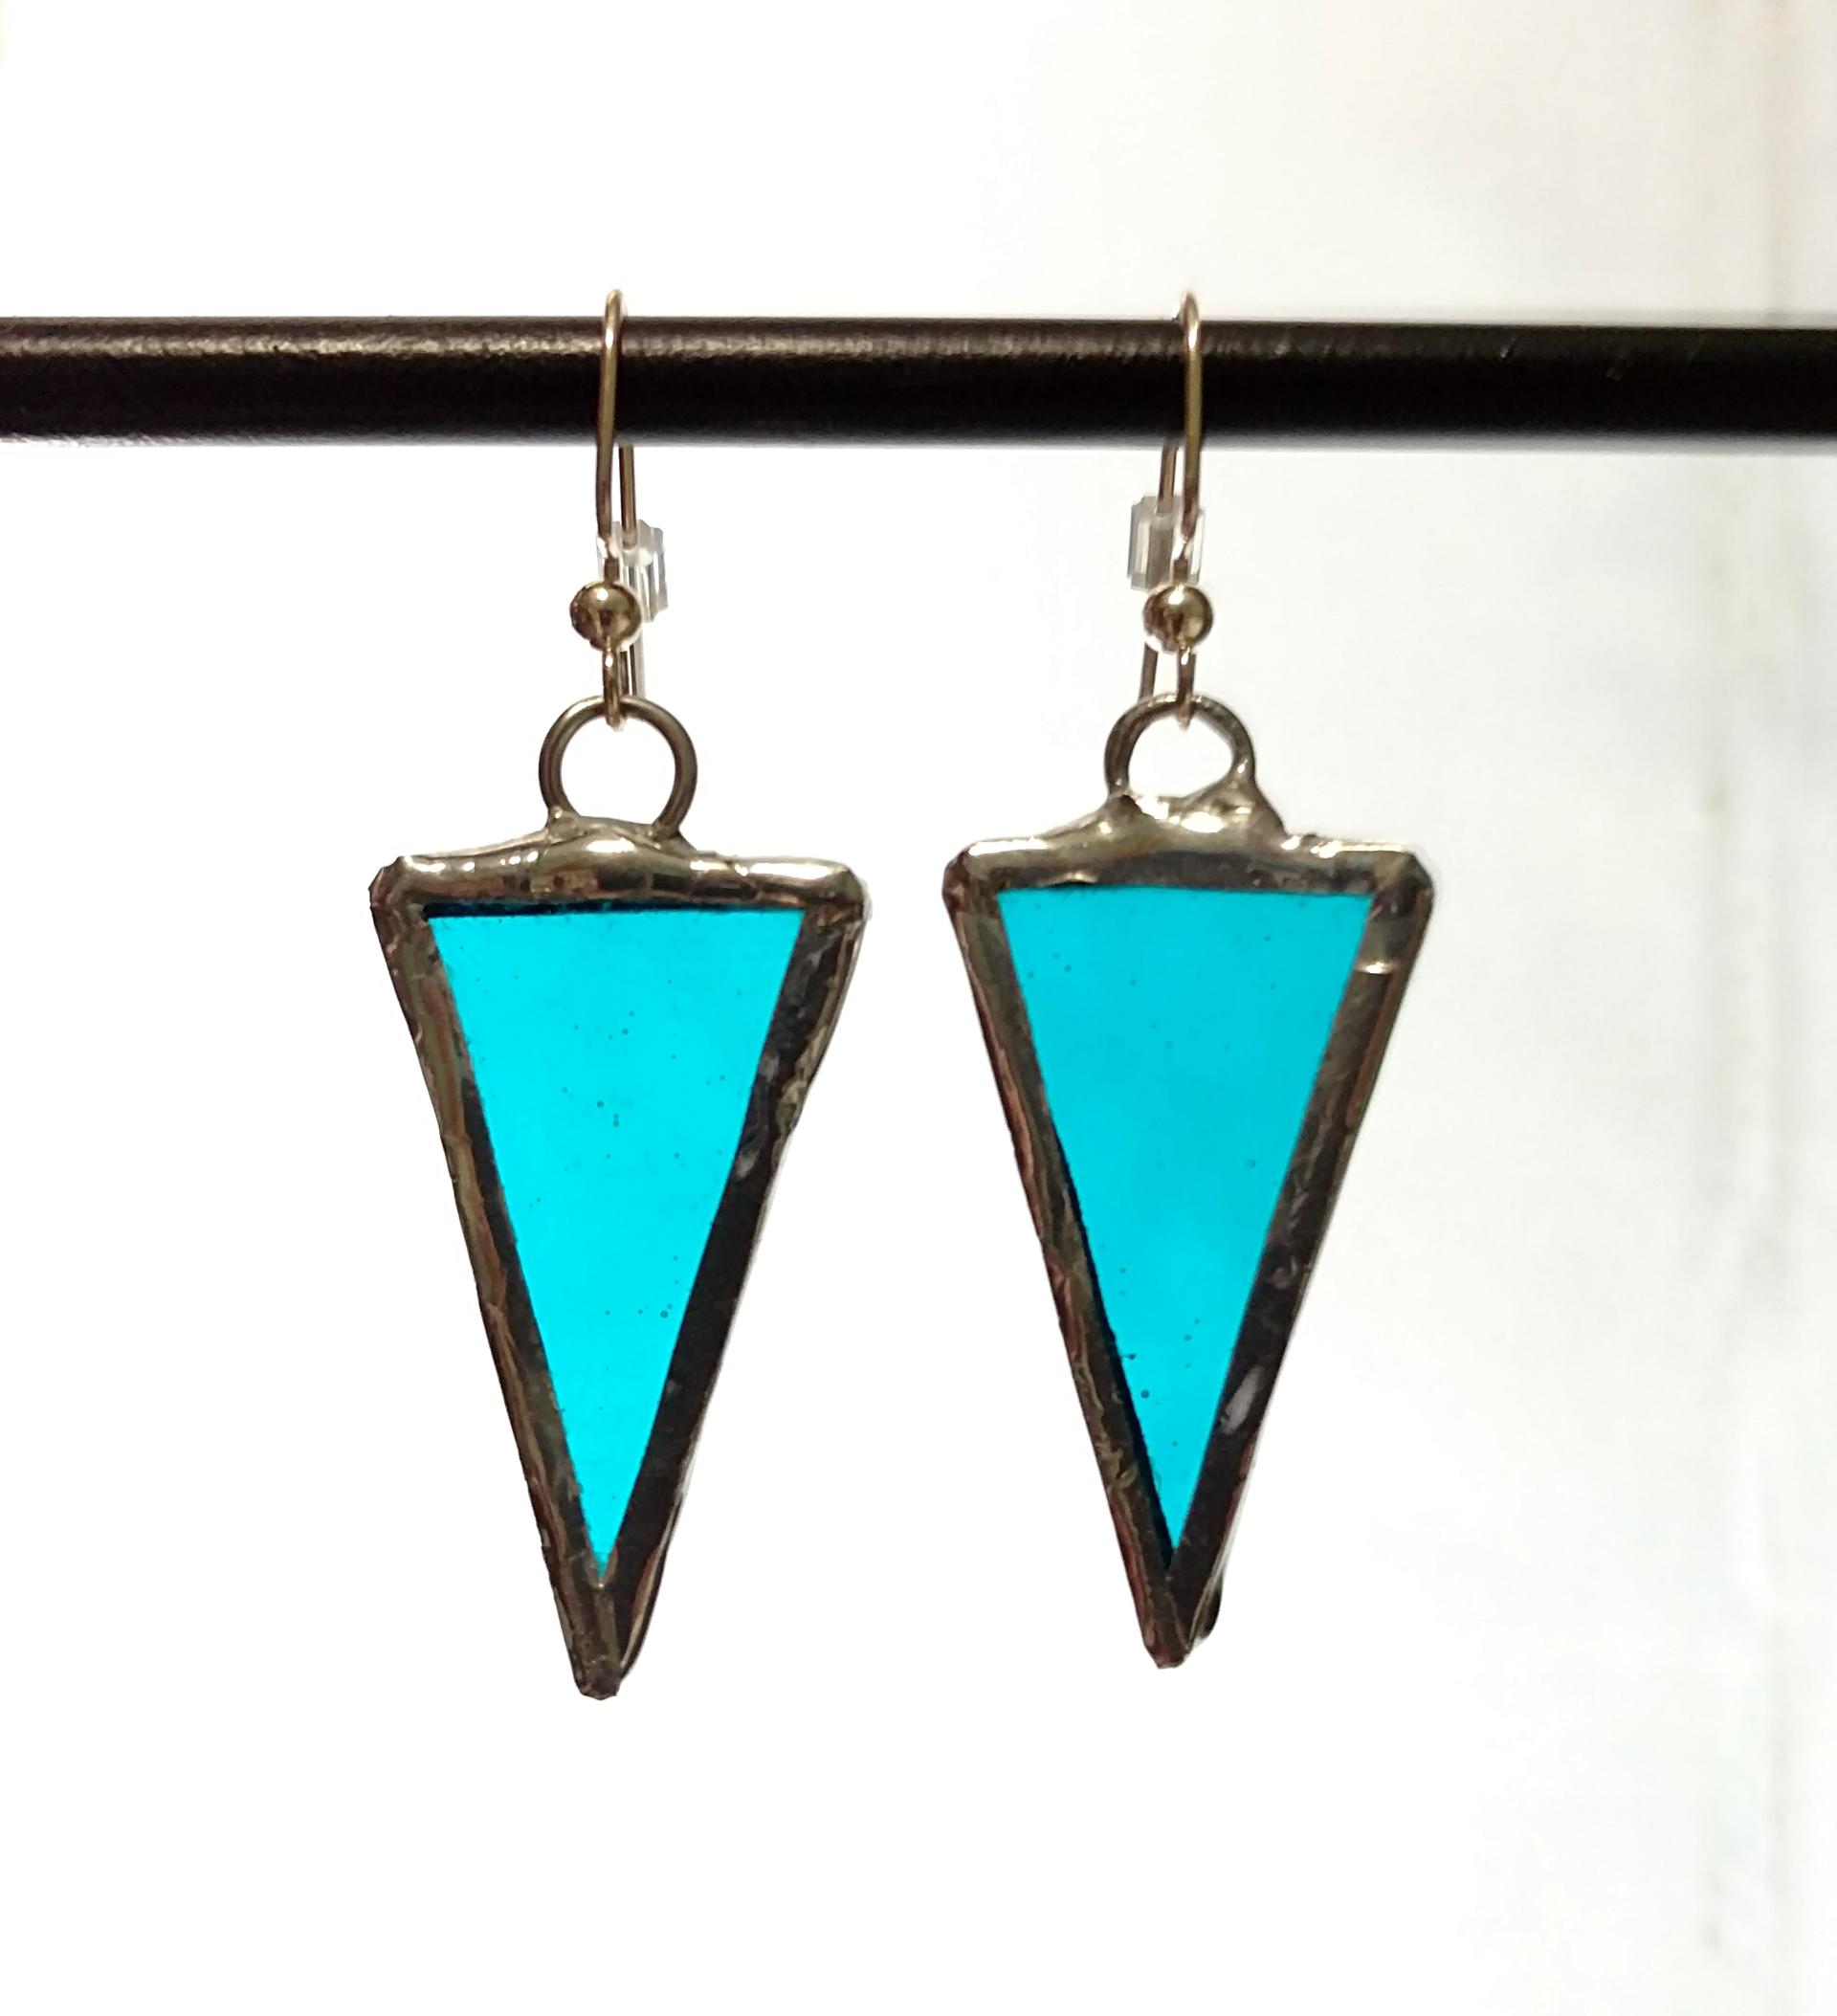 Aqua Blue Textured Stained Glass Earrings